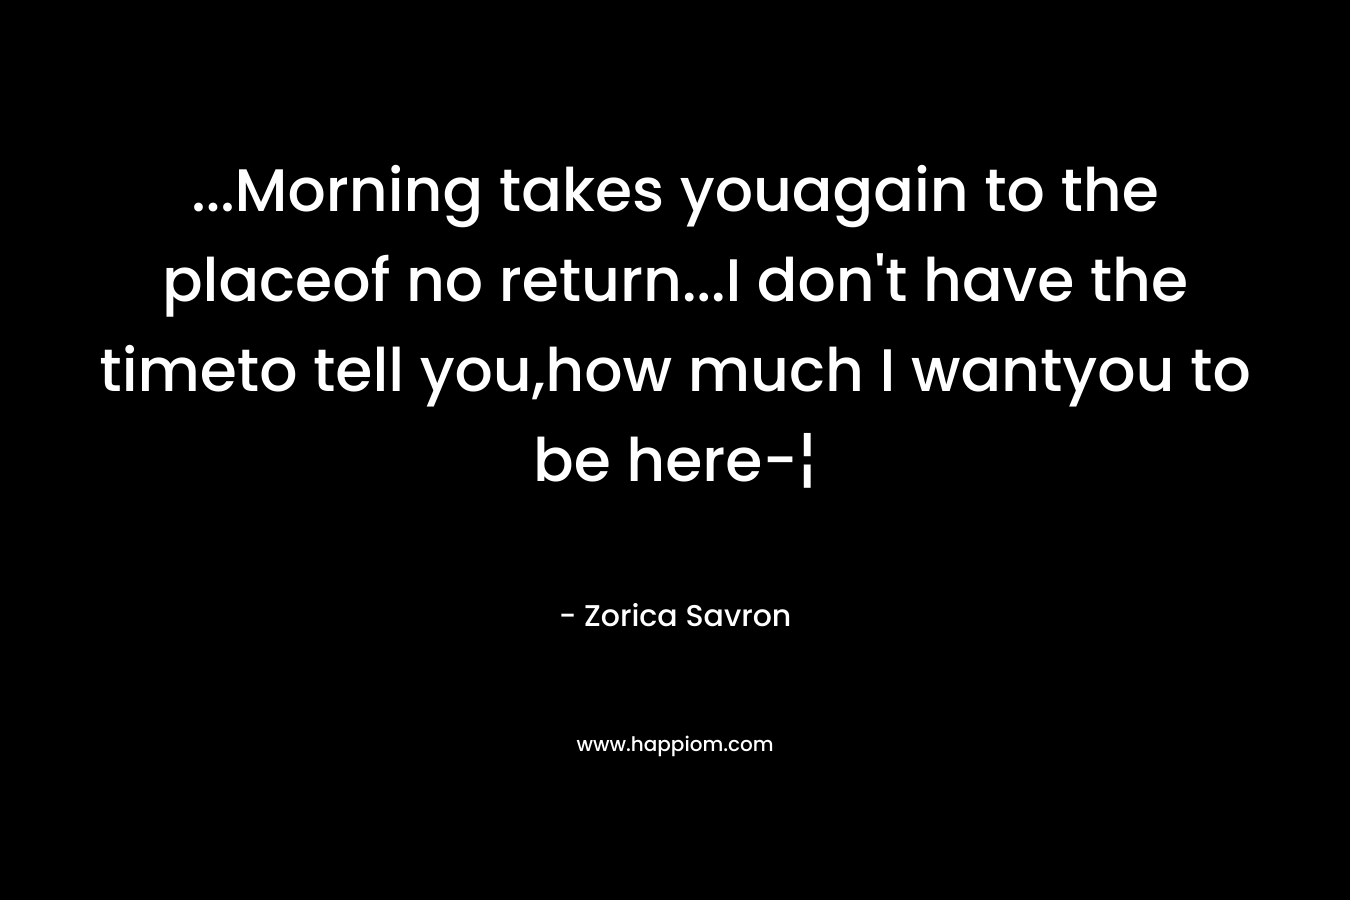 …Morning takes youagain to the placeof no return…I don’t have the timeto tell you,how much I wantyou to be here-¦ – Zorica Savron